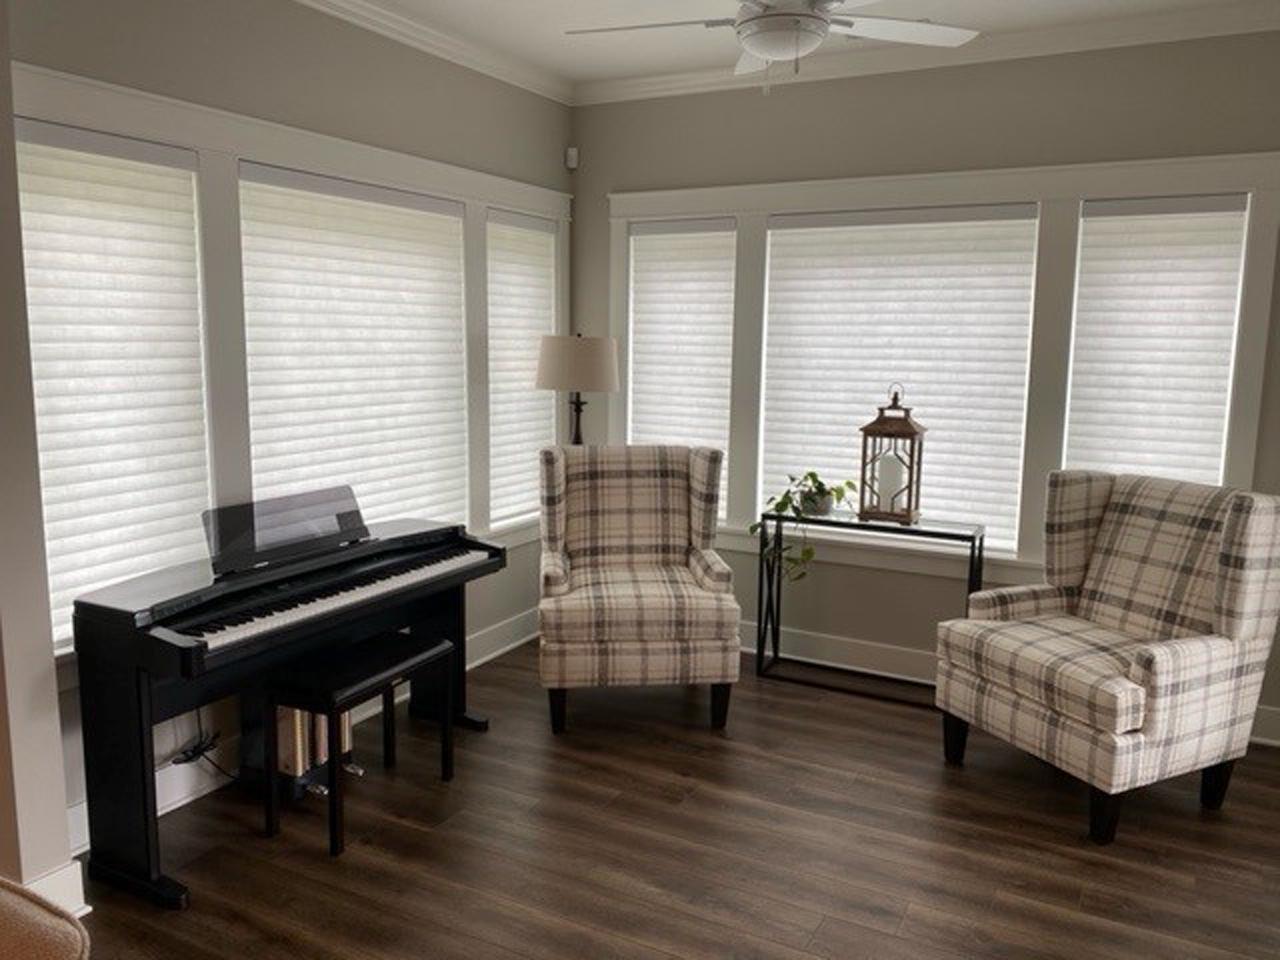 Cellular shades in living room